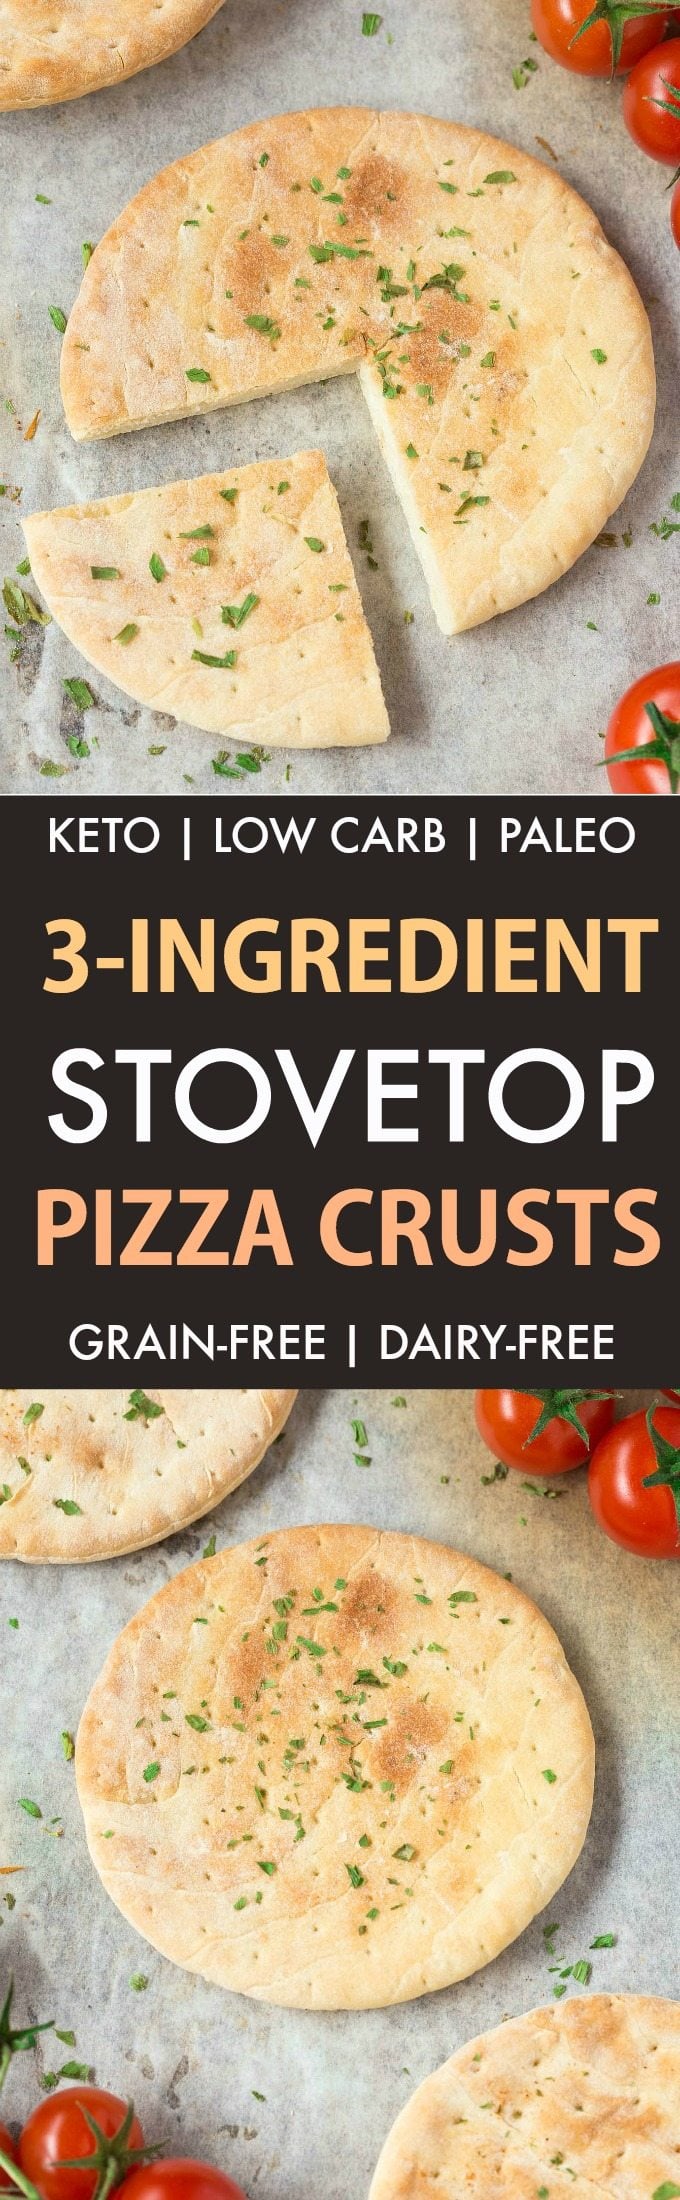 Keto Pizza Crusts topped with basil